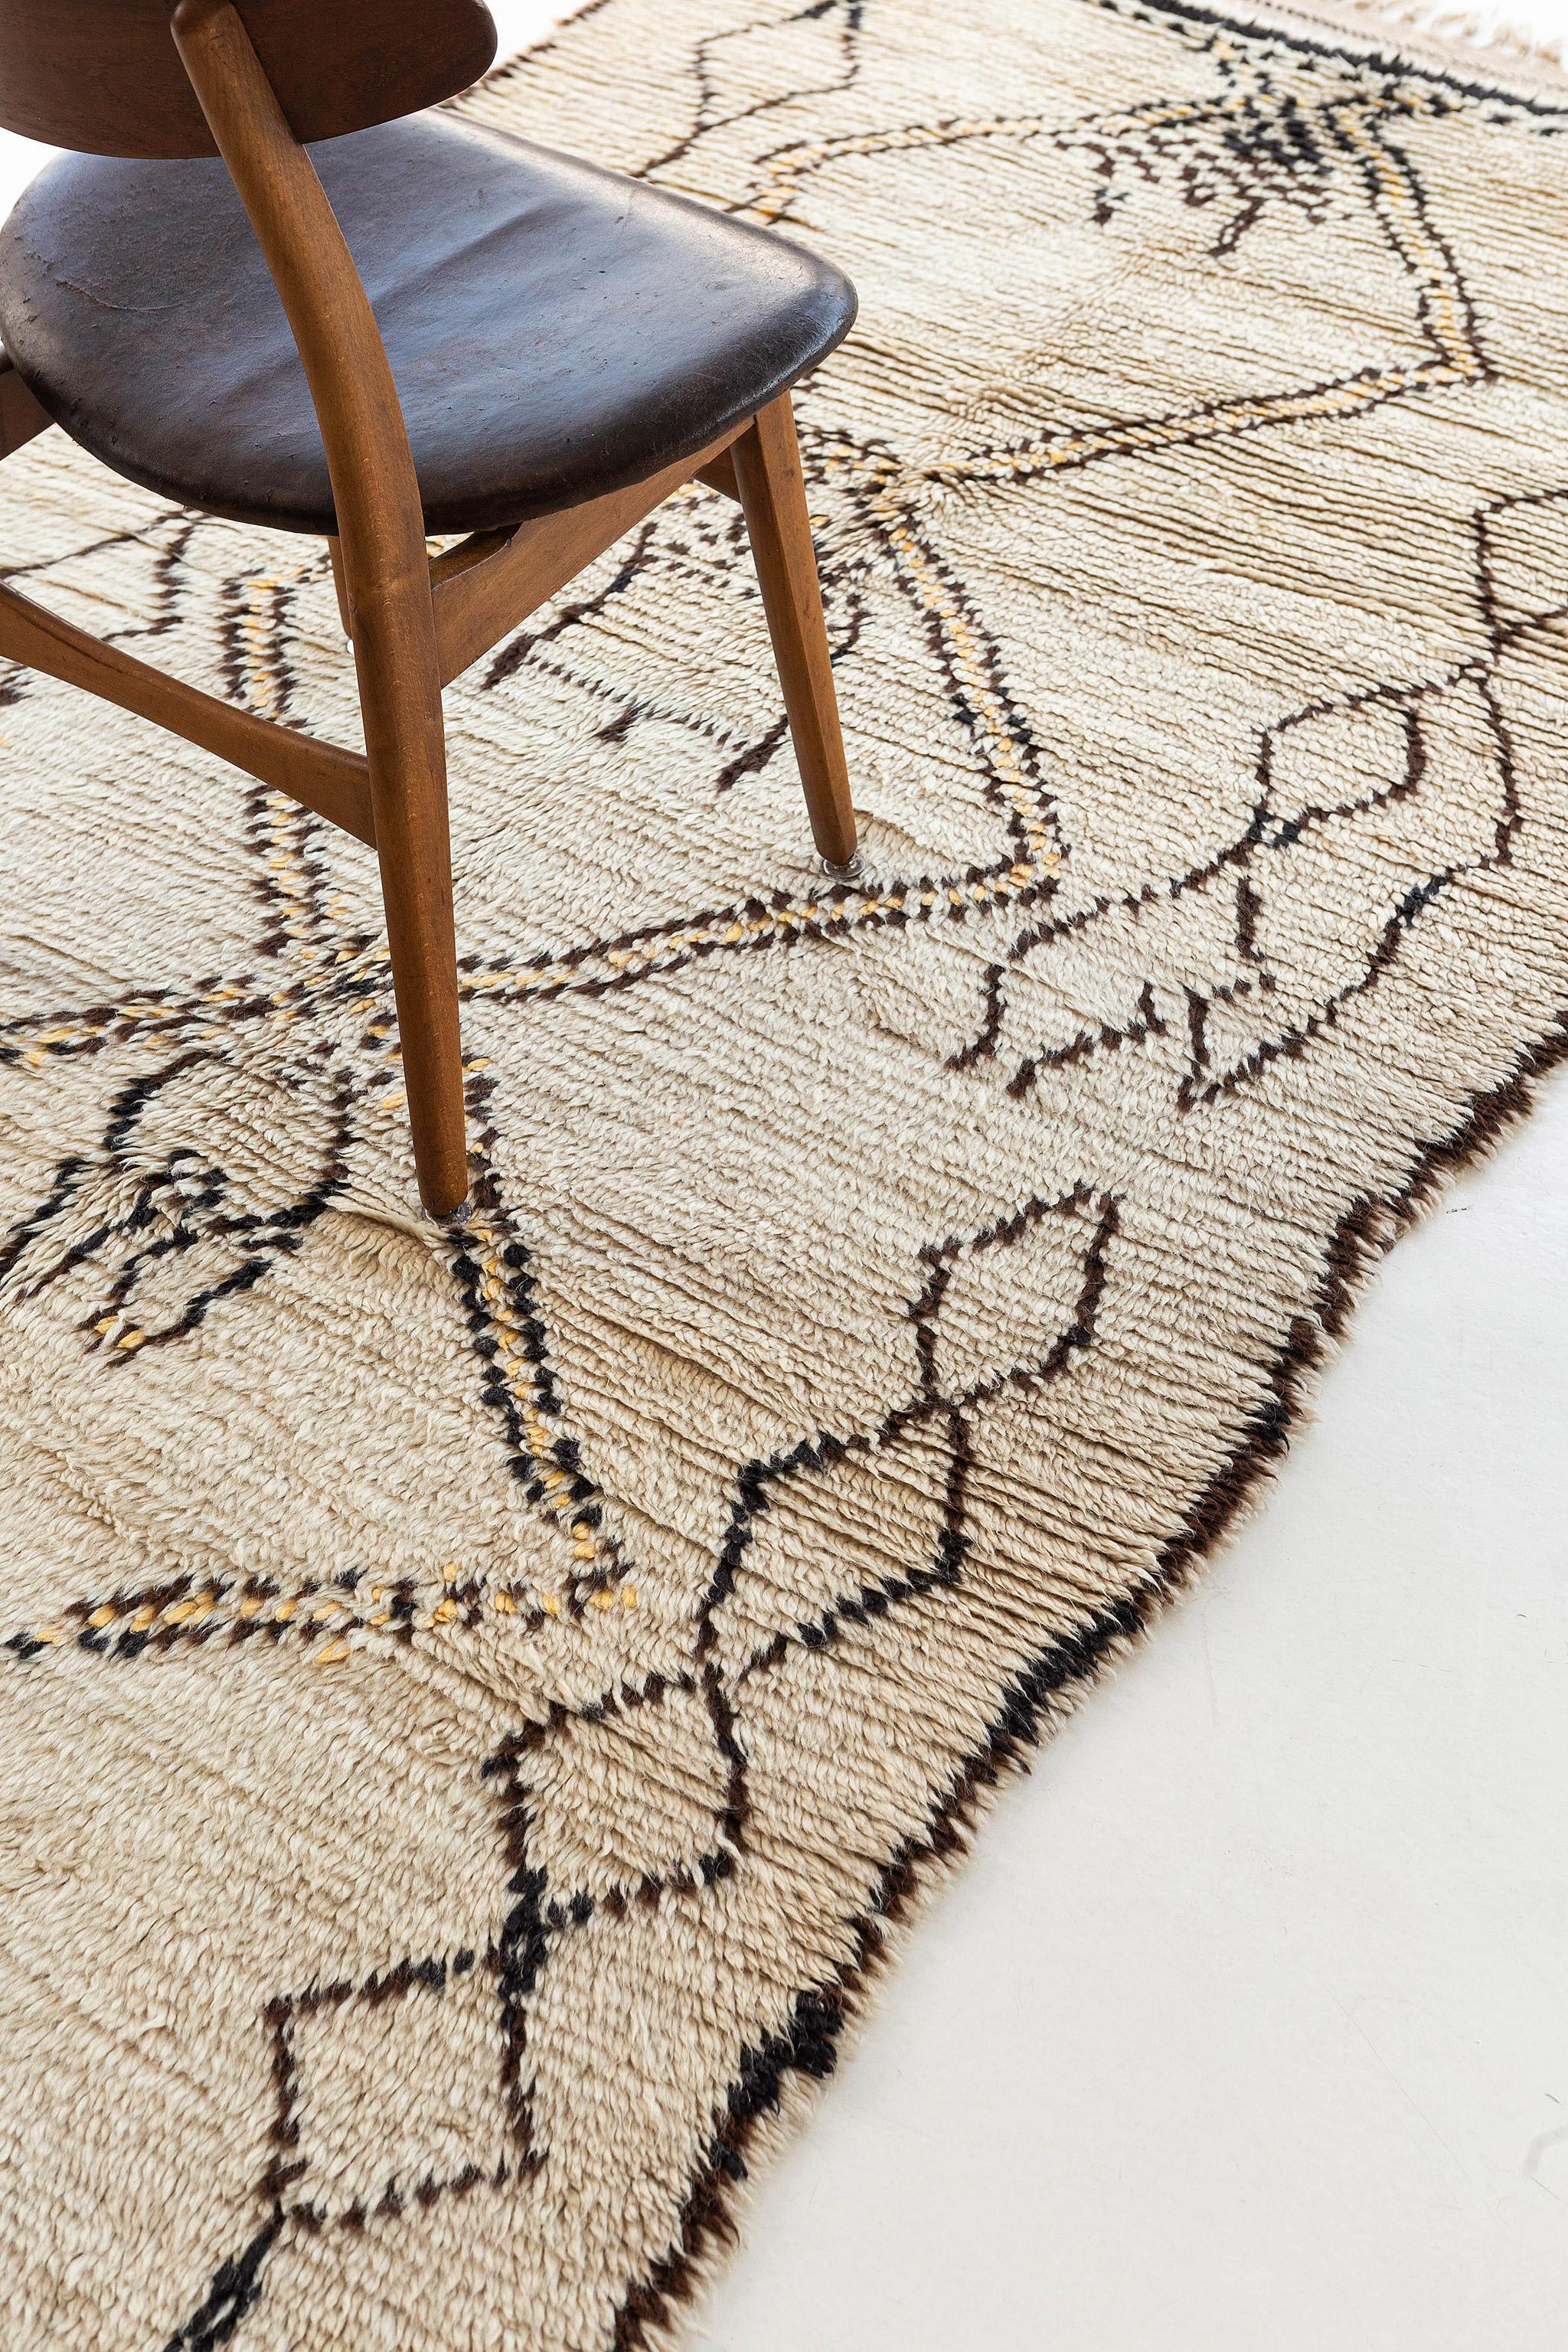 Ivory pile rug with dark brown lines and golden yellow accents. Balanced, axial design with a dominant central diamond structure, flanked by smaller similar elements. Drawing is charmingly irregular. A unique vintage tribal rug from the Atlas